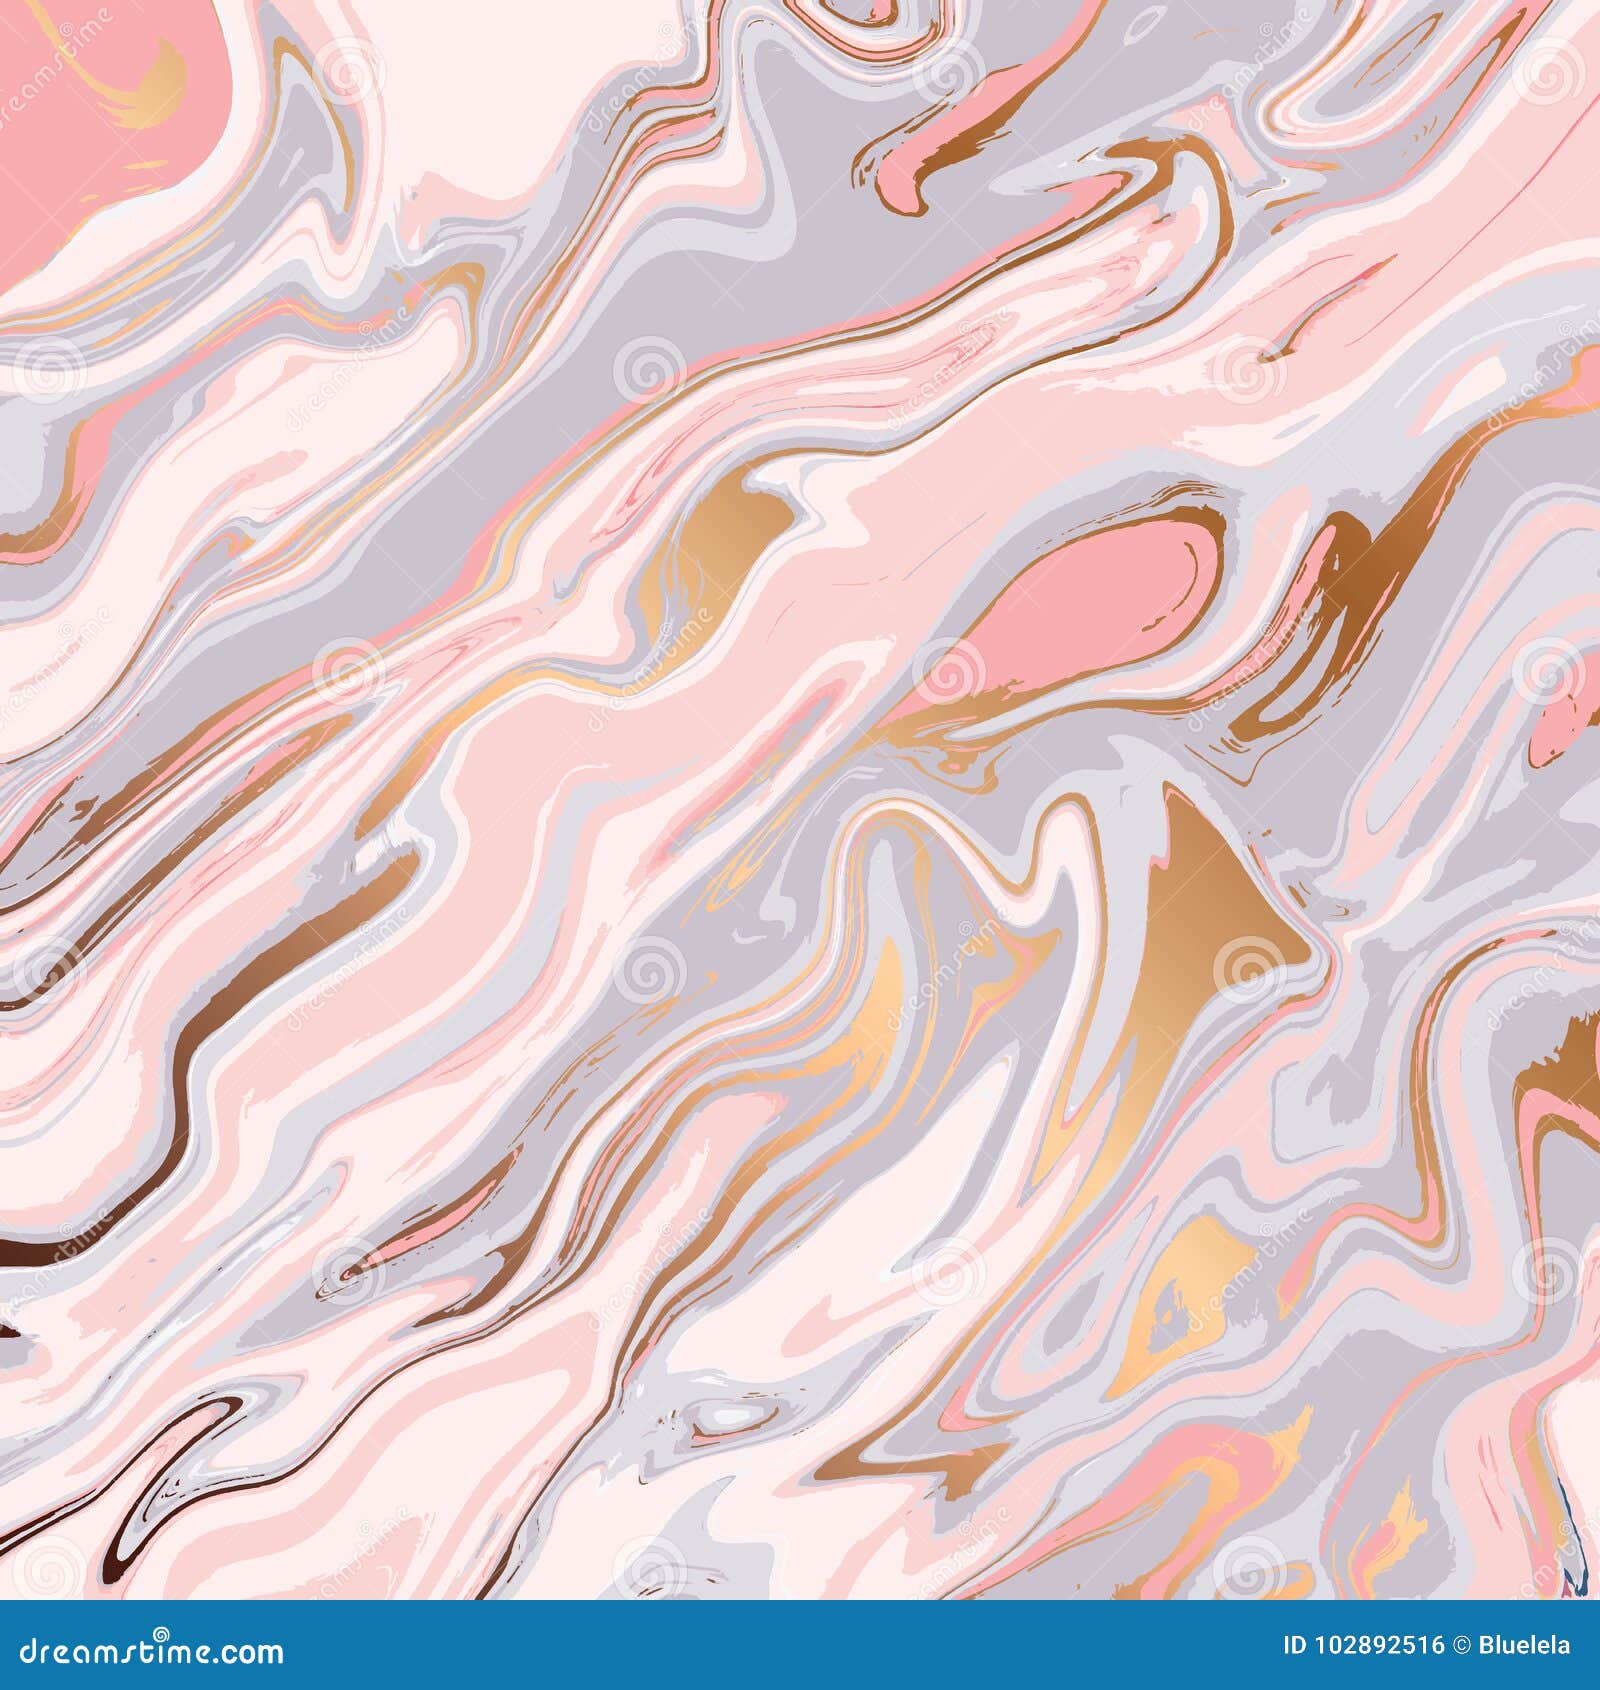 liquid marble texture , colorful marbling surface